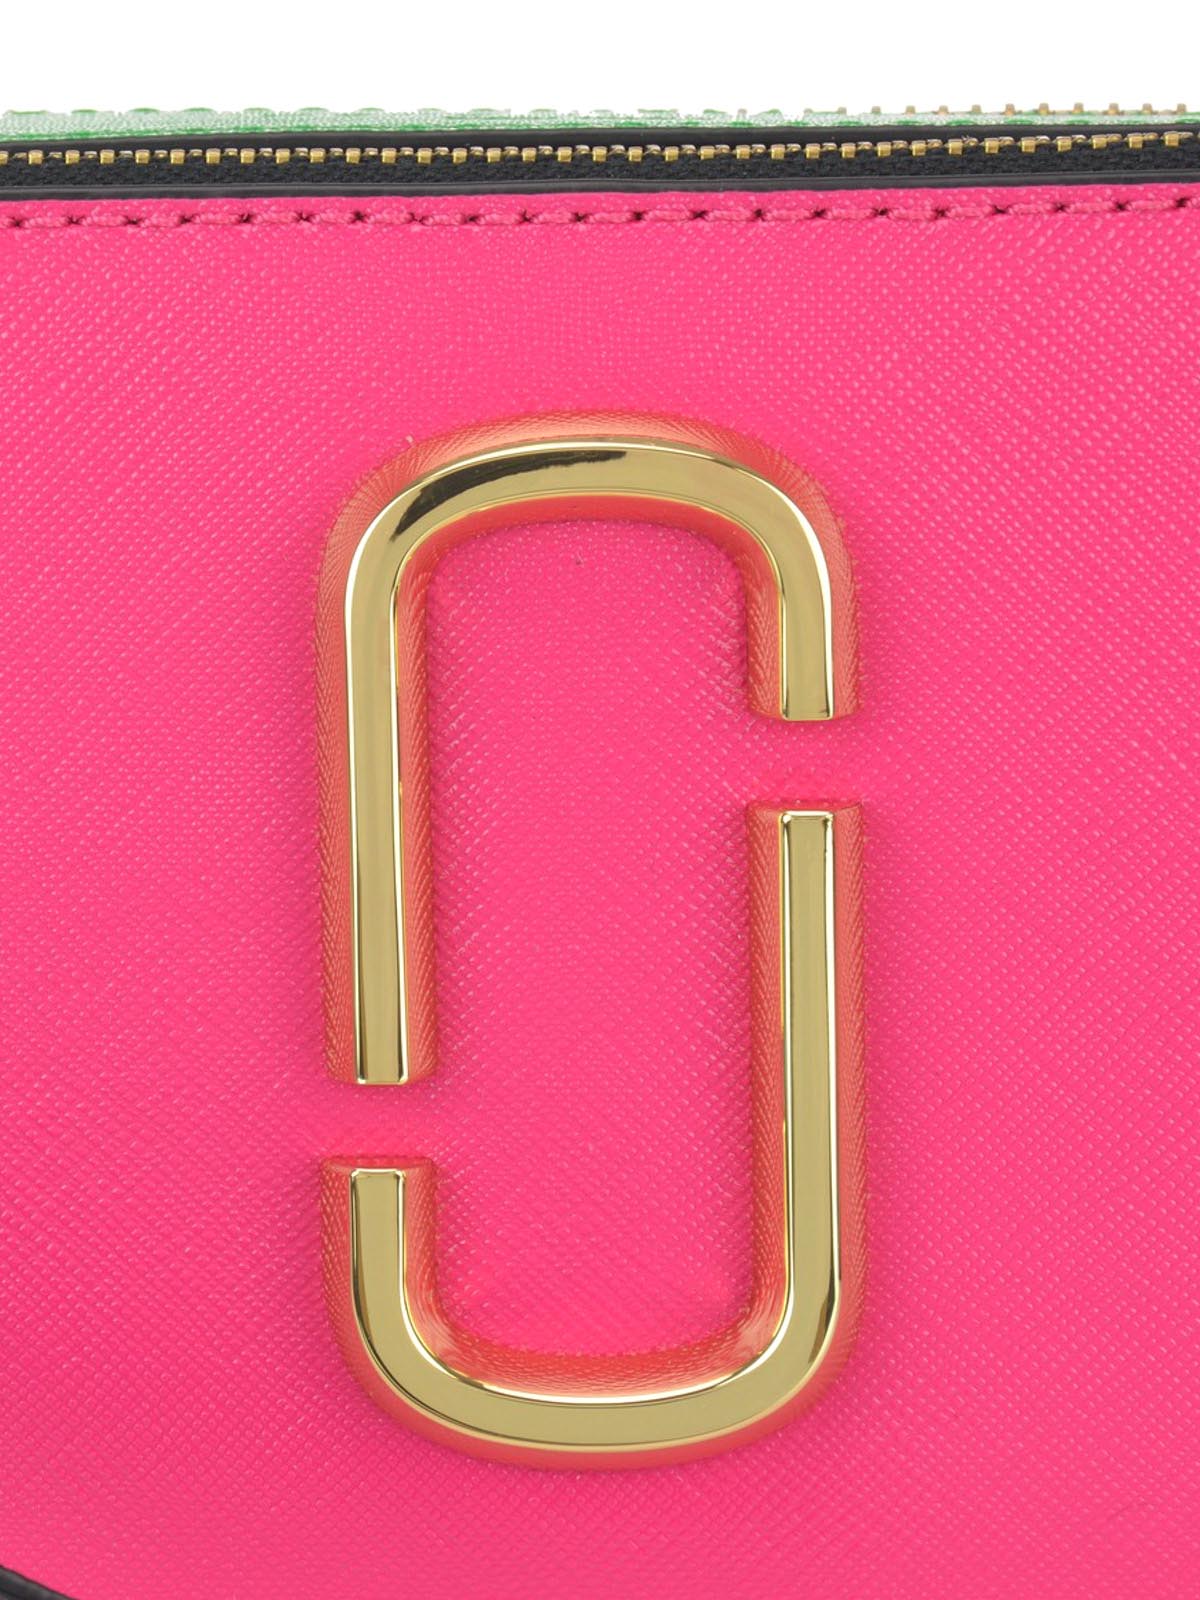 Snapshot of Marc Jacobs - Pink and beige rectangular leather bag